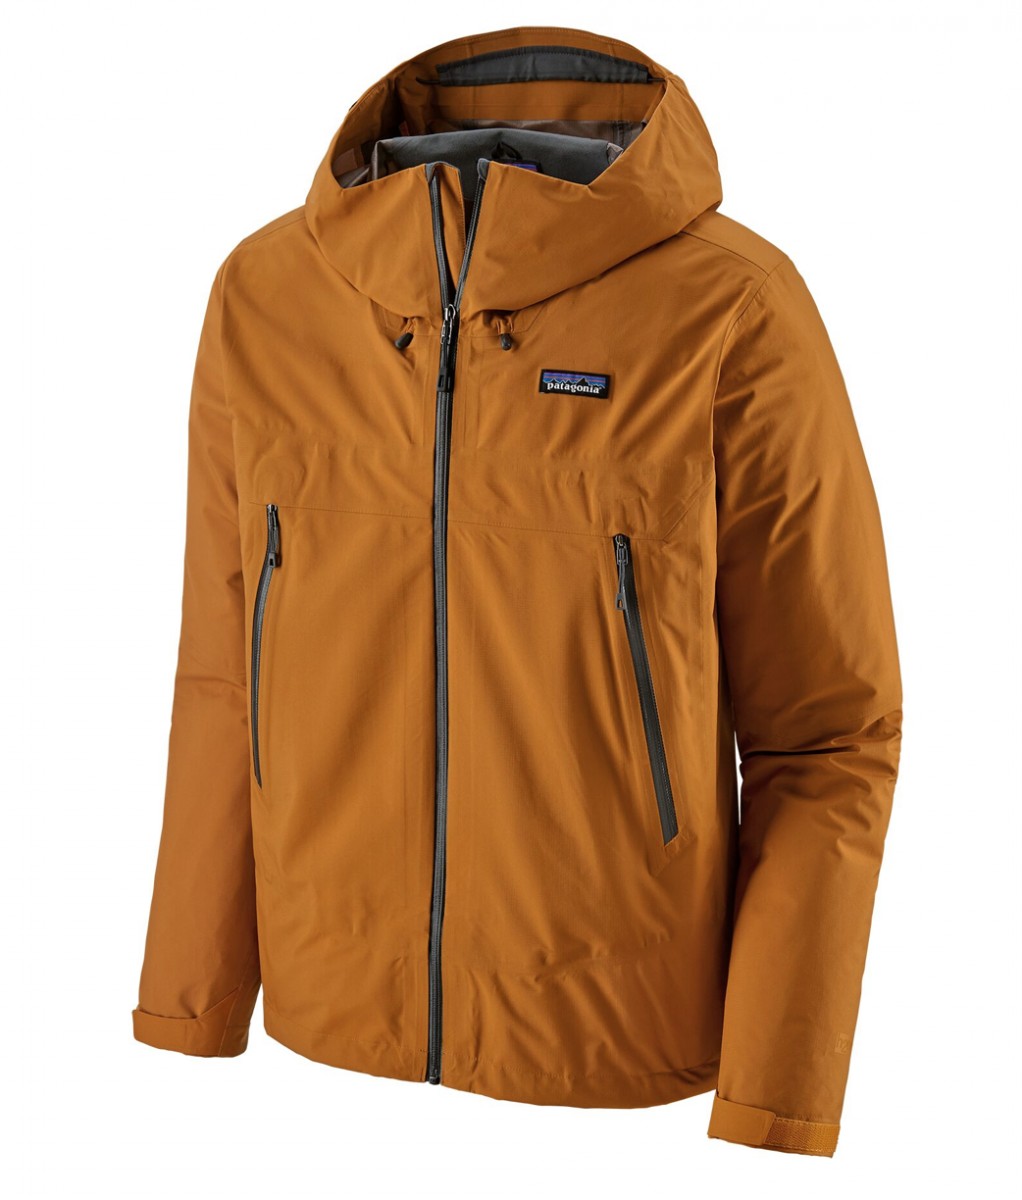 Patagonia Cloud Ridge Review | Tested by GearLab